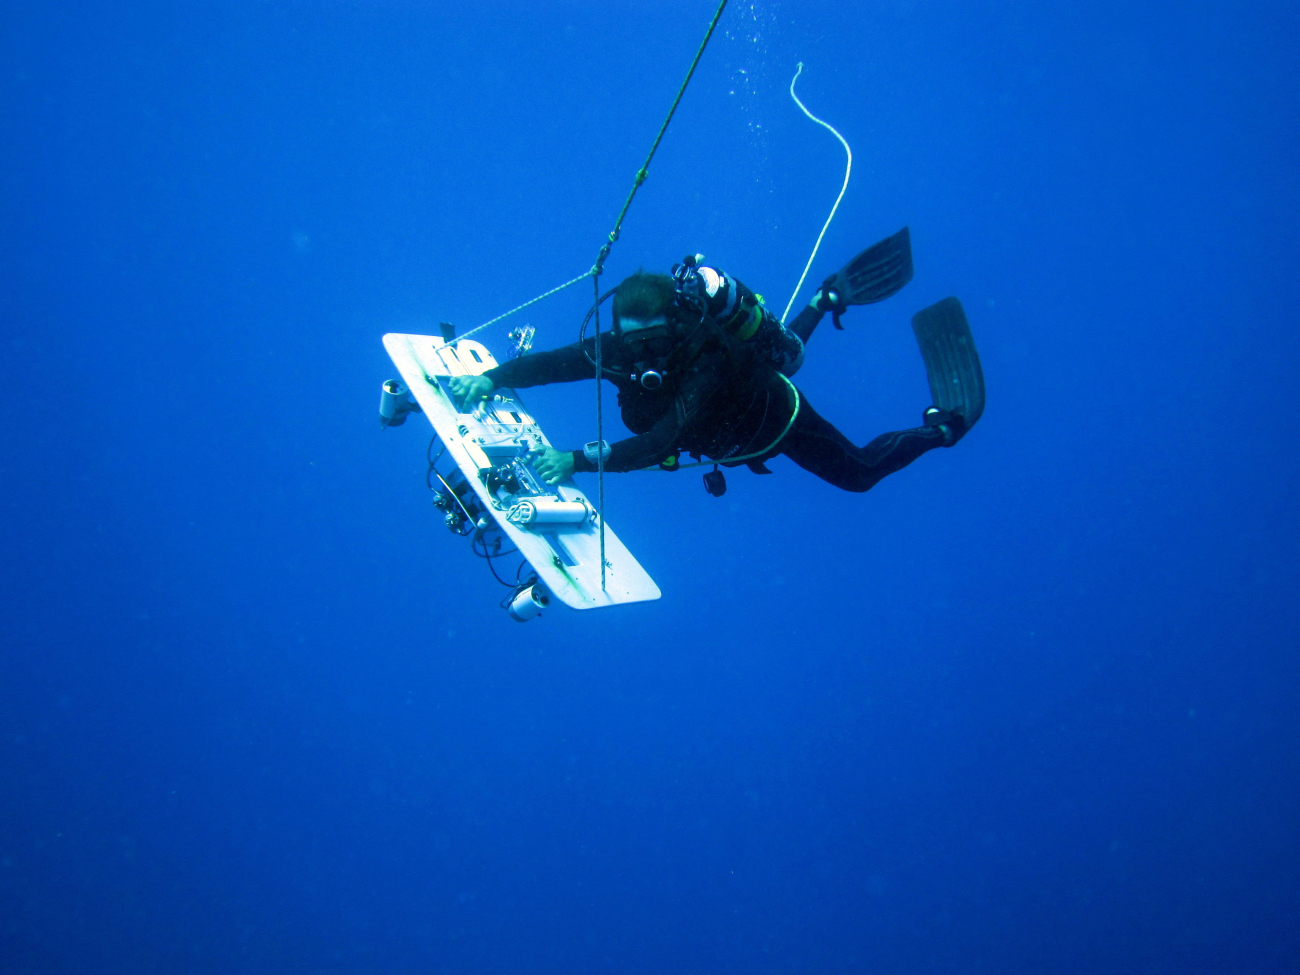 Diver seemingly suspended in space while towboarding through exceptionallyclear open water